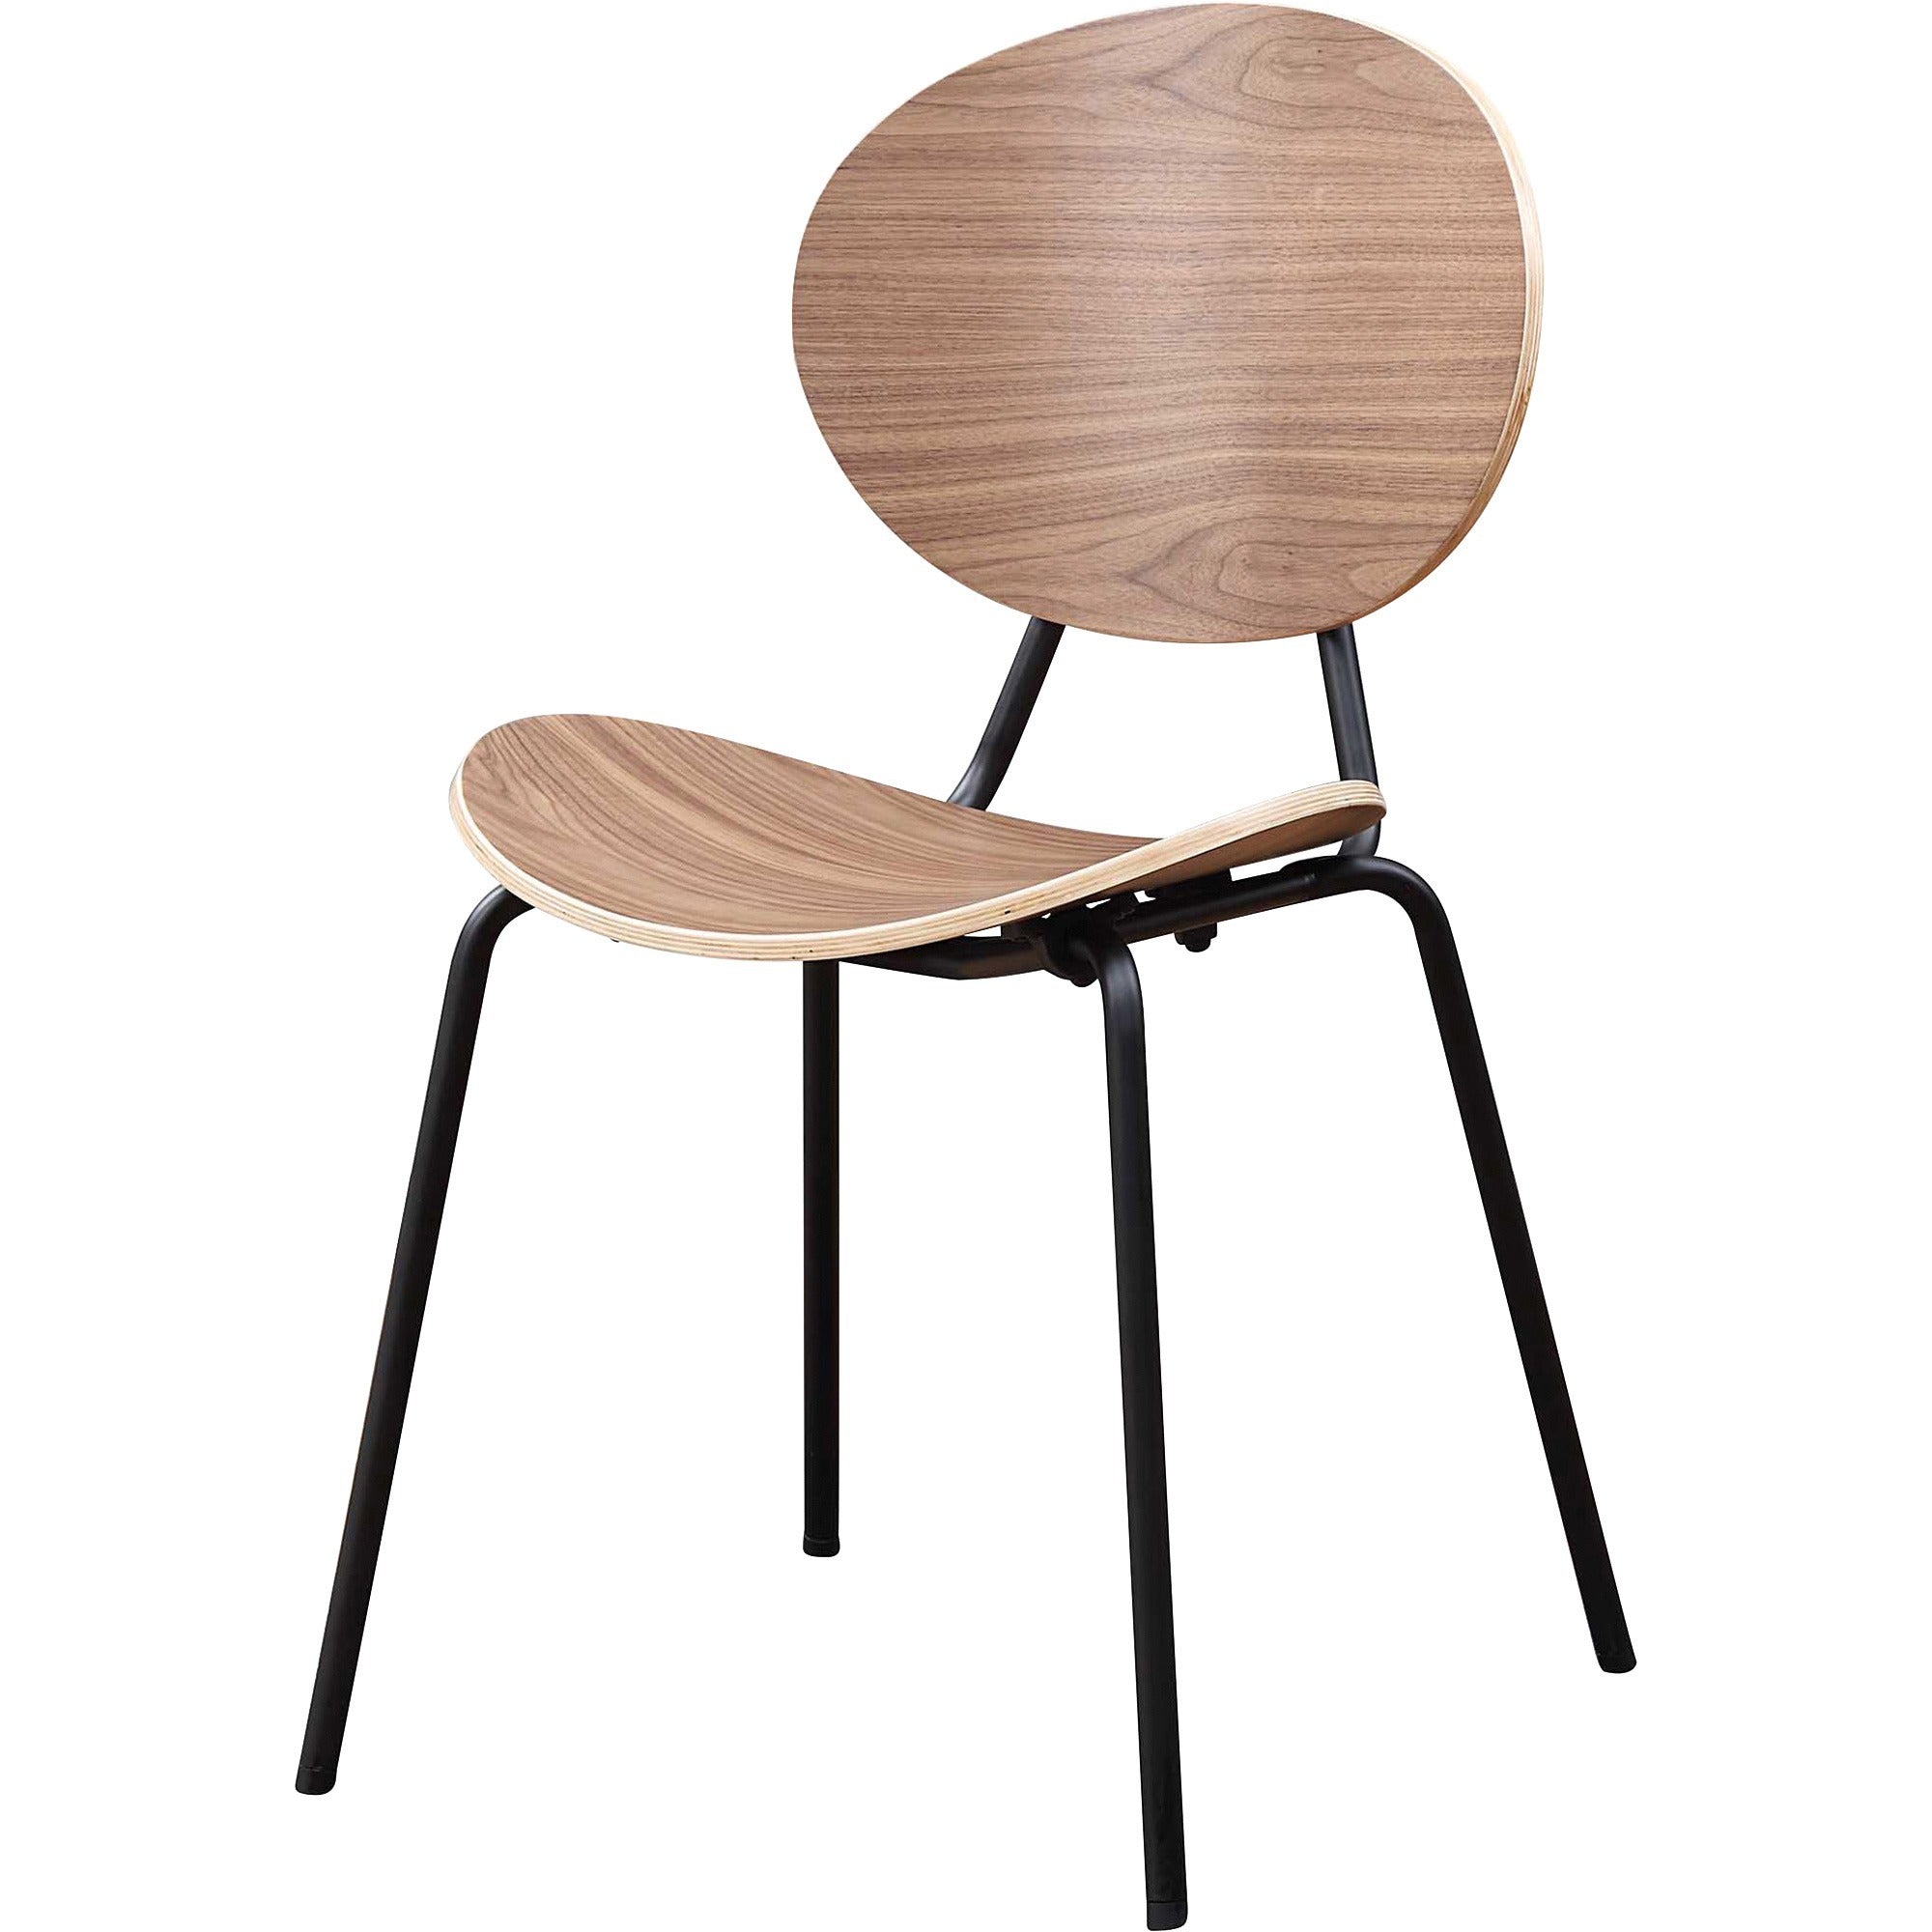 lorell-bentwood-cafe-chairs-plywood-seat-plywood-back-metal-powder-coated-steel-frame-walnut-2-carton_llr42962 - 3